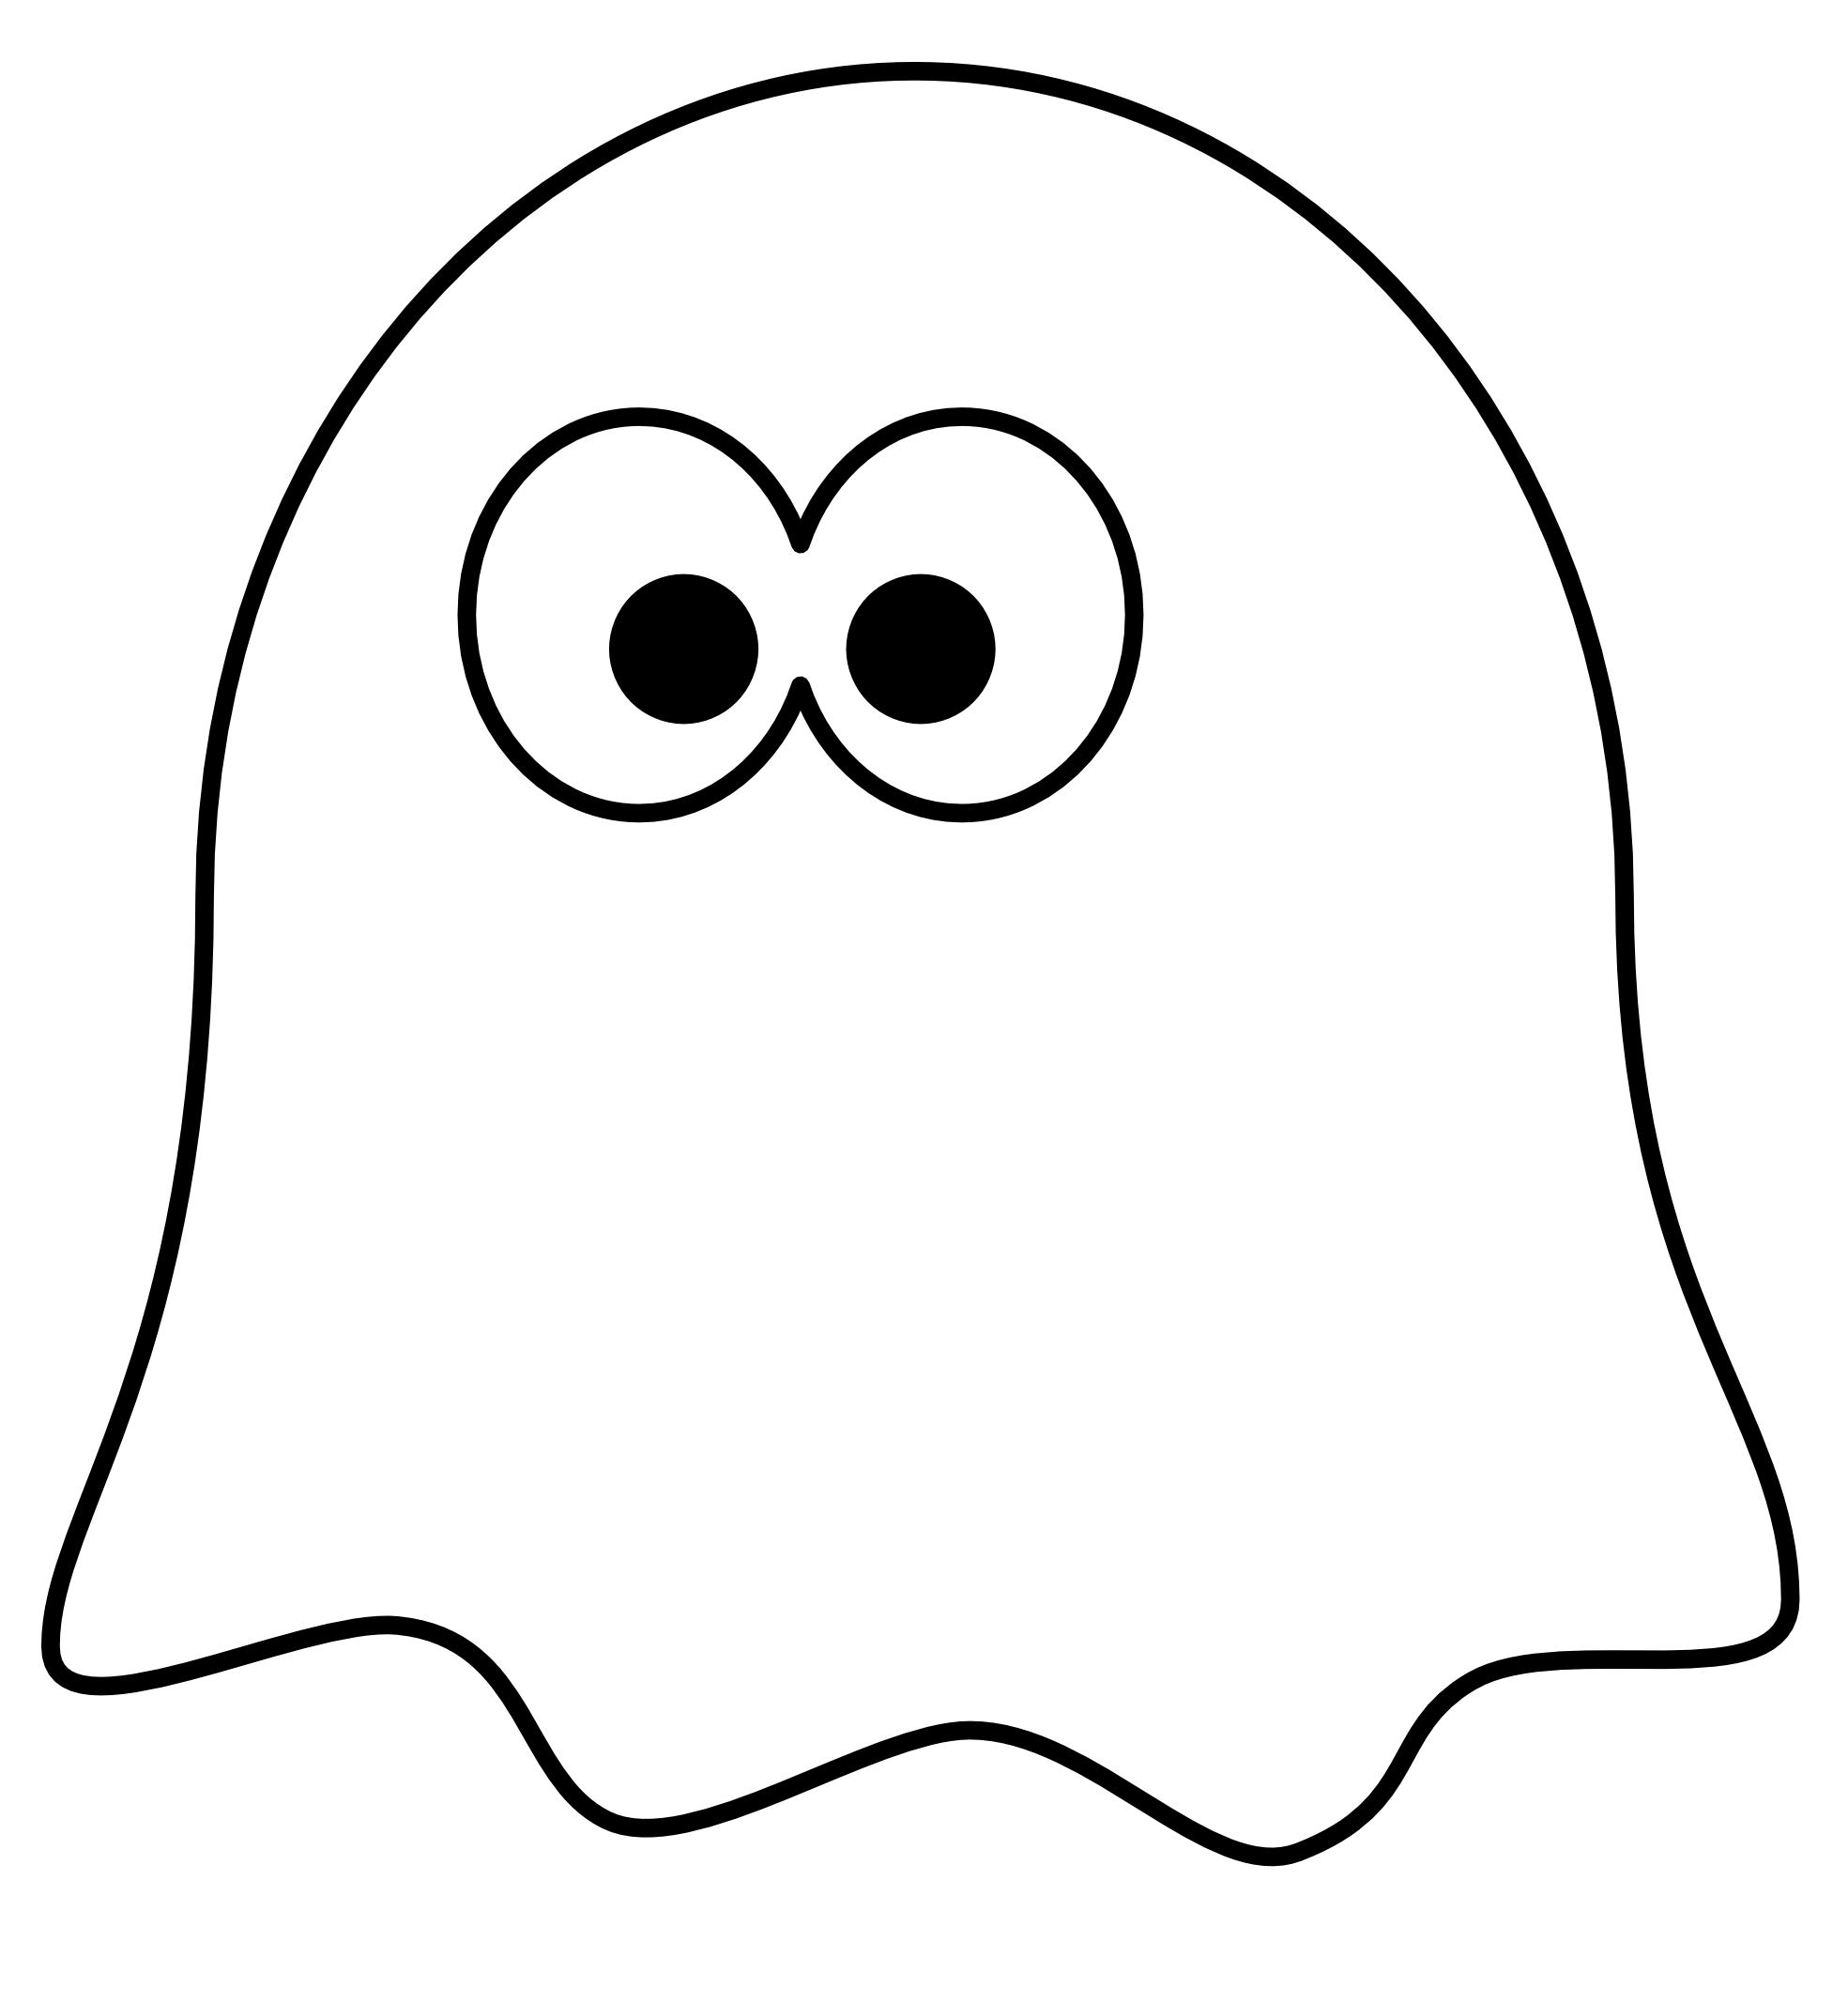 Ghost Clipart Black And White | Clipart library - Free Clipart Images